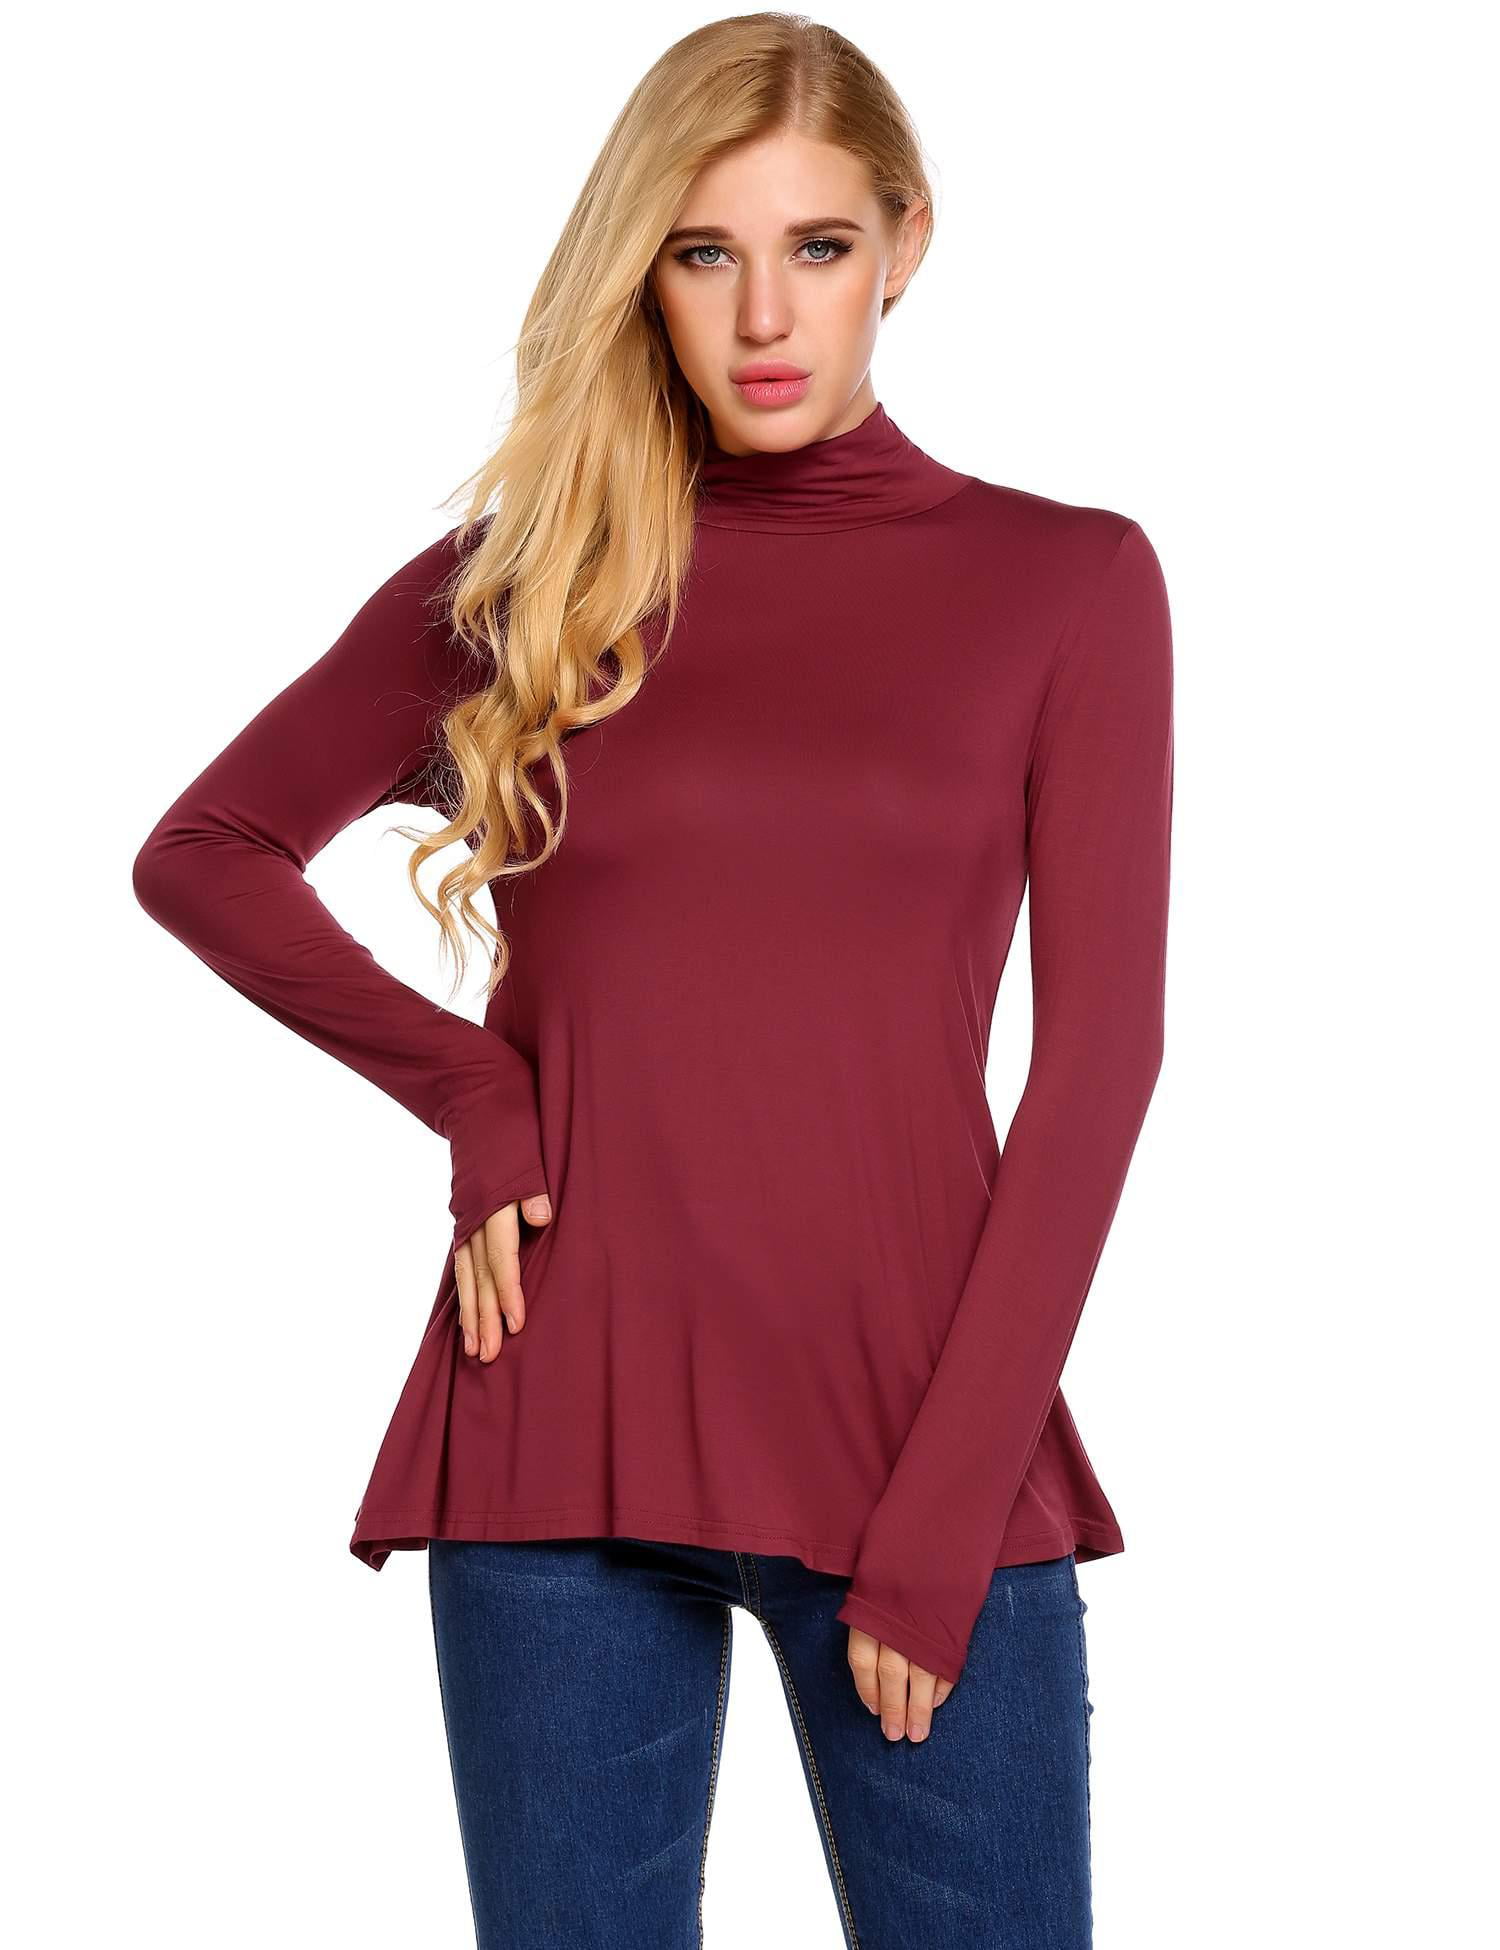 Women Casual Long Sleeve High Neck Solid Loose Fit Pullover Tunic Tops ...